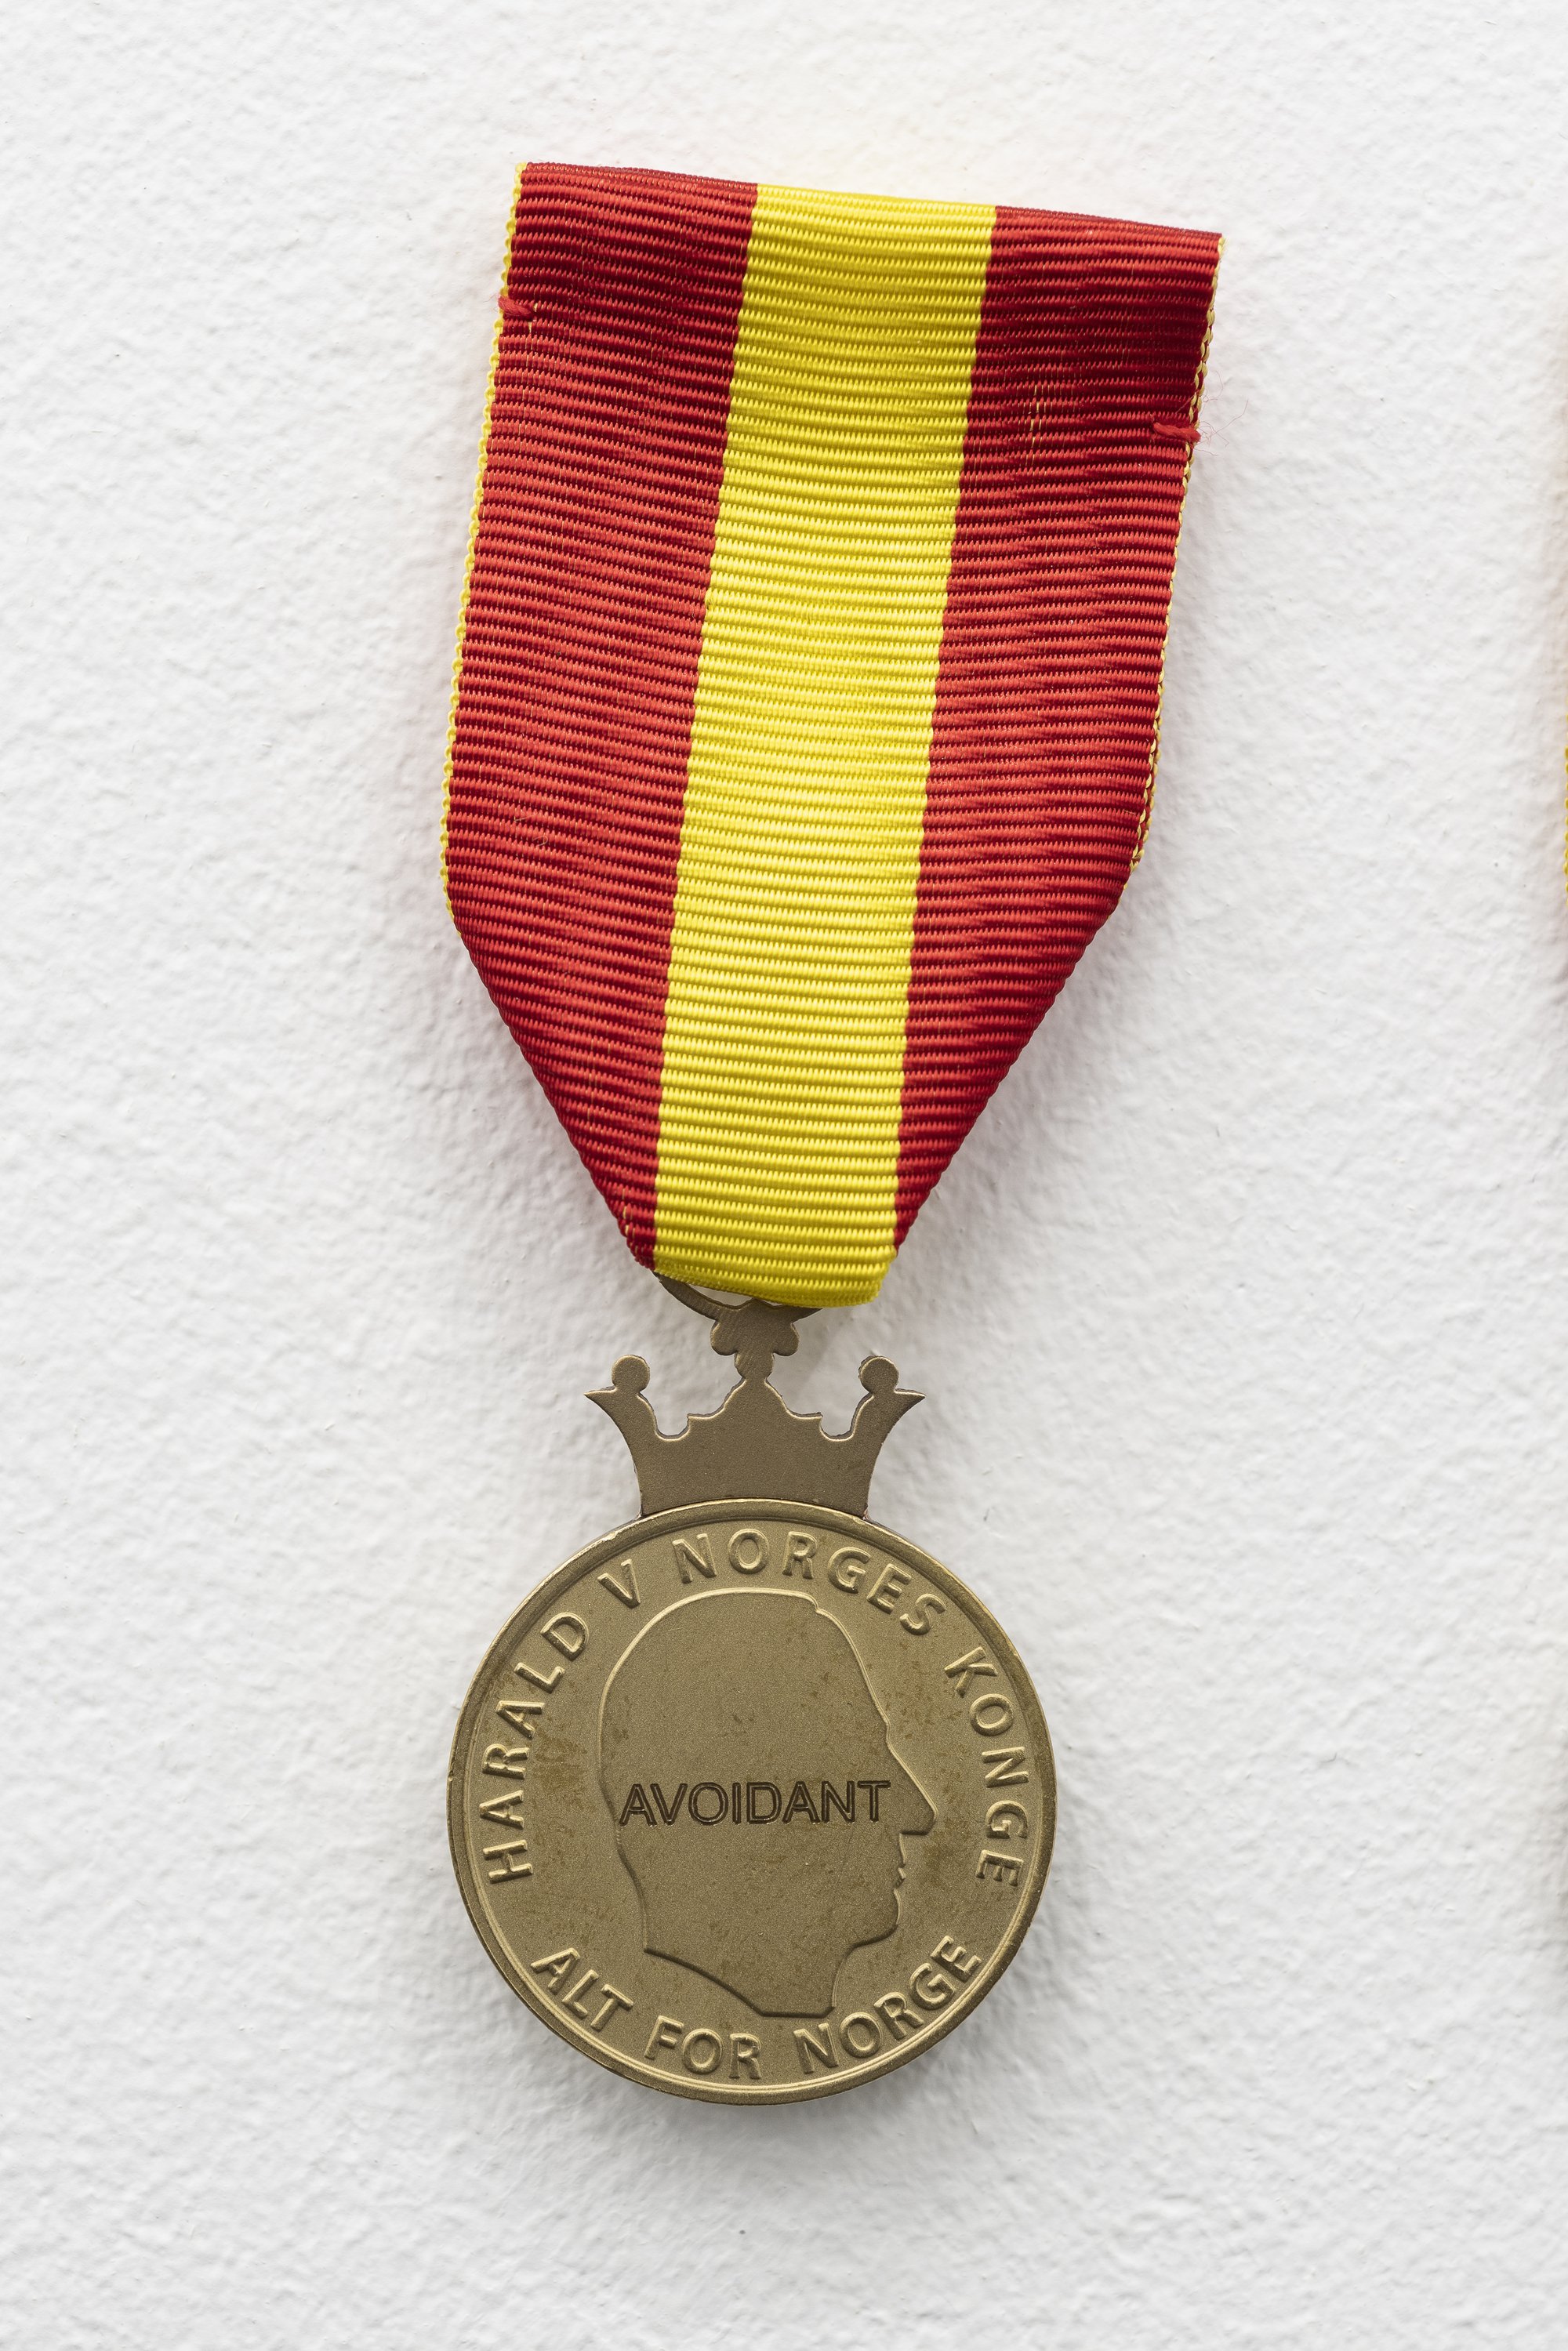 Sidsel Meineche Hansen, Avoidant, medal of merit, stamped in Nordic Gold with engraving and silk ribbon, 30 mm (diameter) - 35 mm (ribbon), 2021